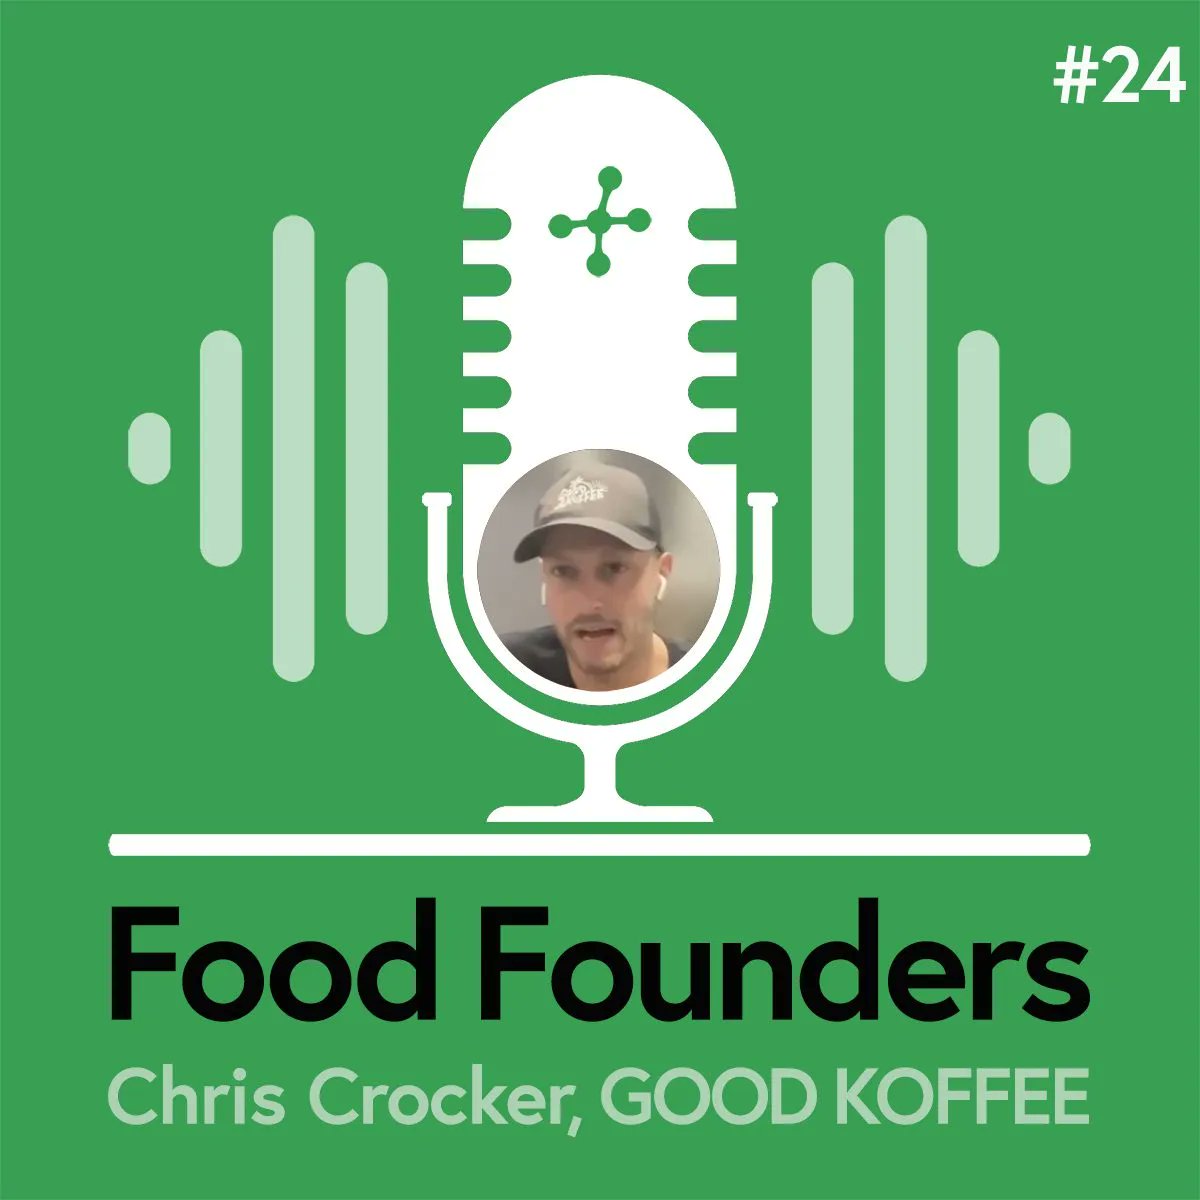 Buzz without the booze: How Chris Crocker created @GOODKoffee's social mixers and coffee tonics buff.ly/3INUlt1

#foodfounder #drinksbusiness #beverage #founders #entrepreneur #foodpreneur #drinks #innovation